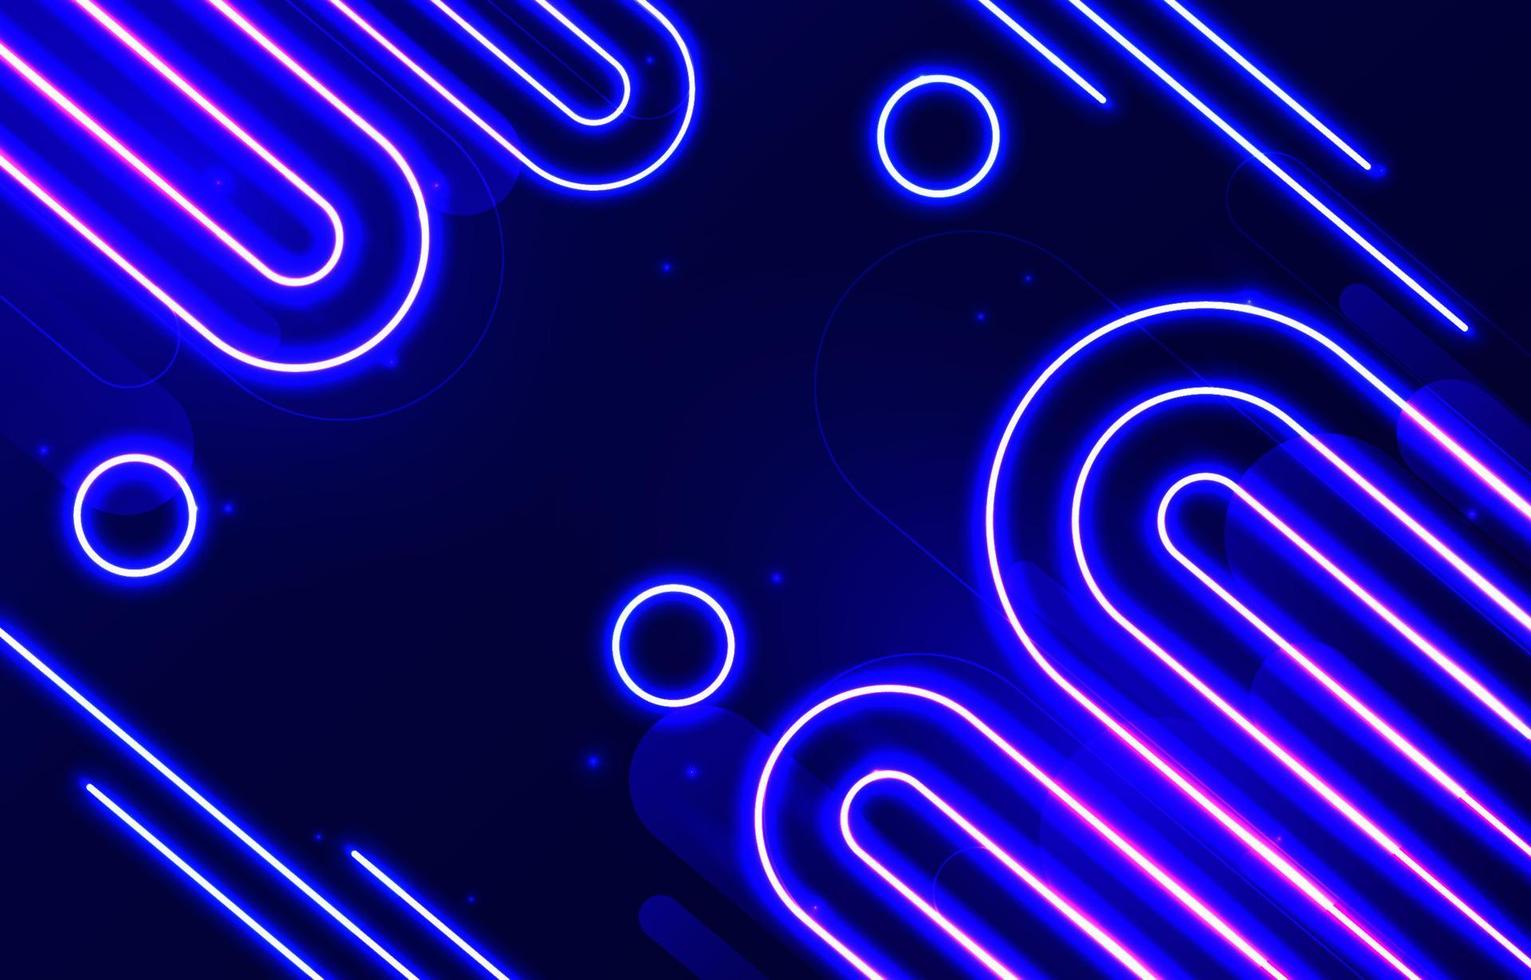 Abstract Neon Light Background vector